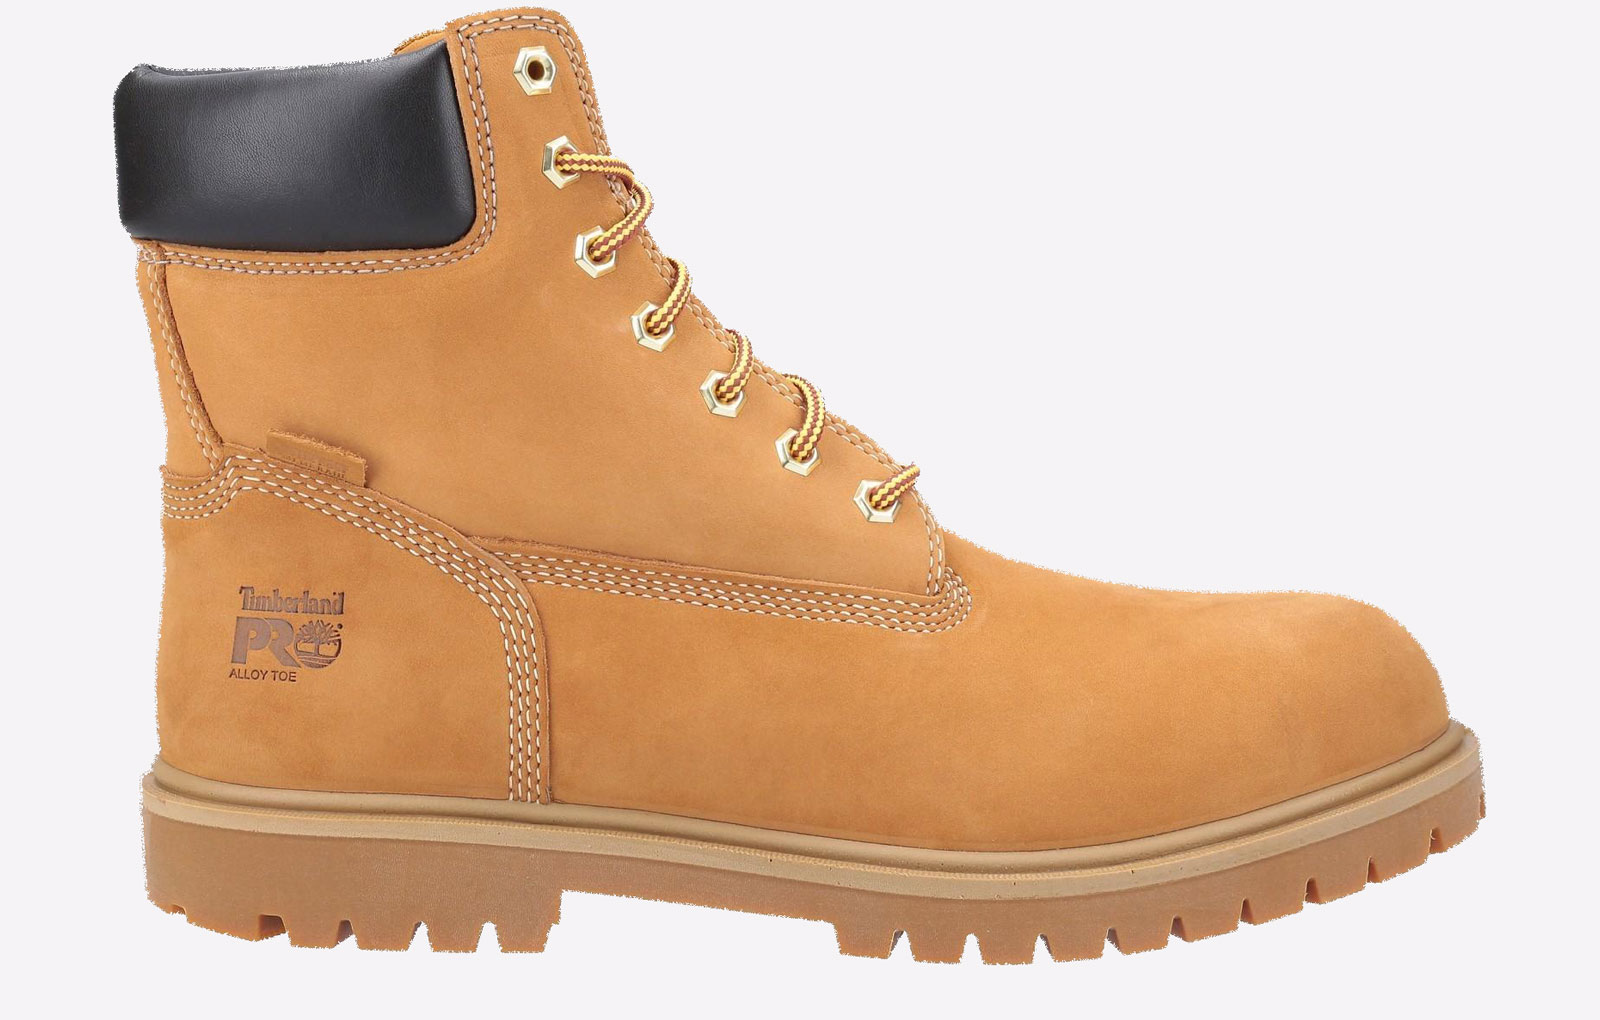 Timberland Pro Iconic Safety Toe Work Boot Mens - GRD-30949-52787-14